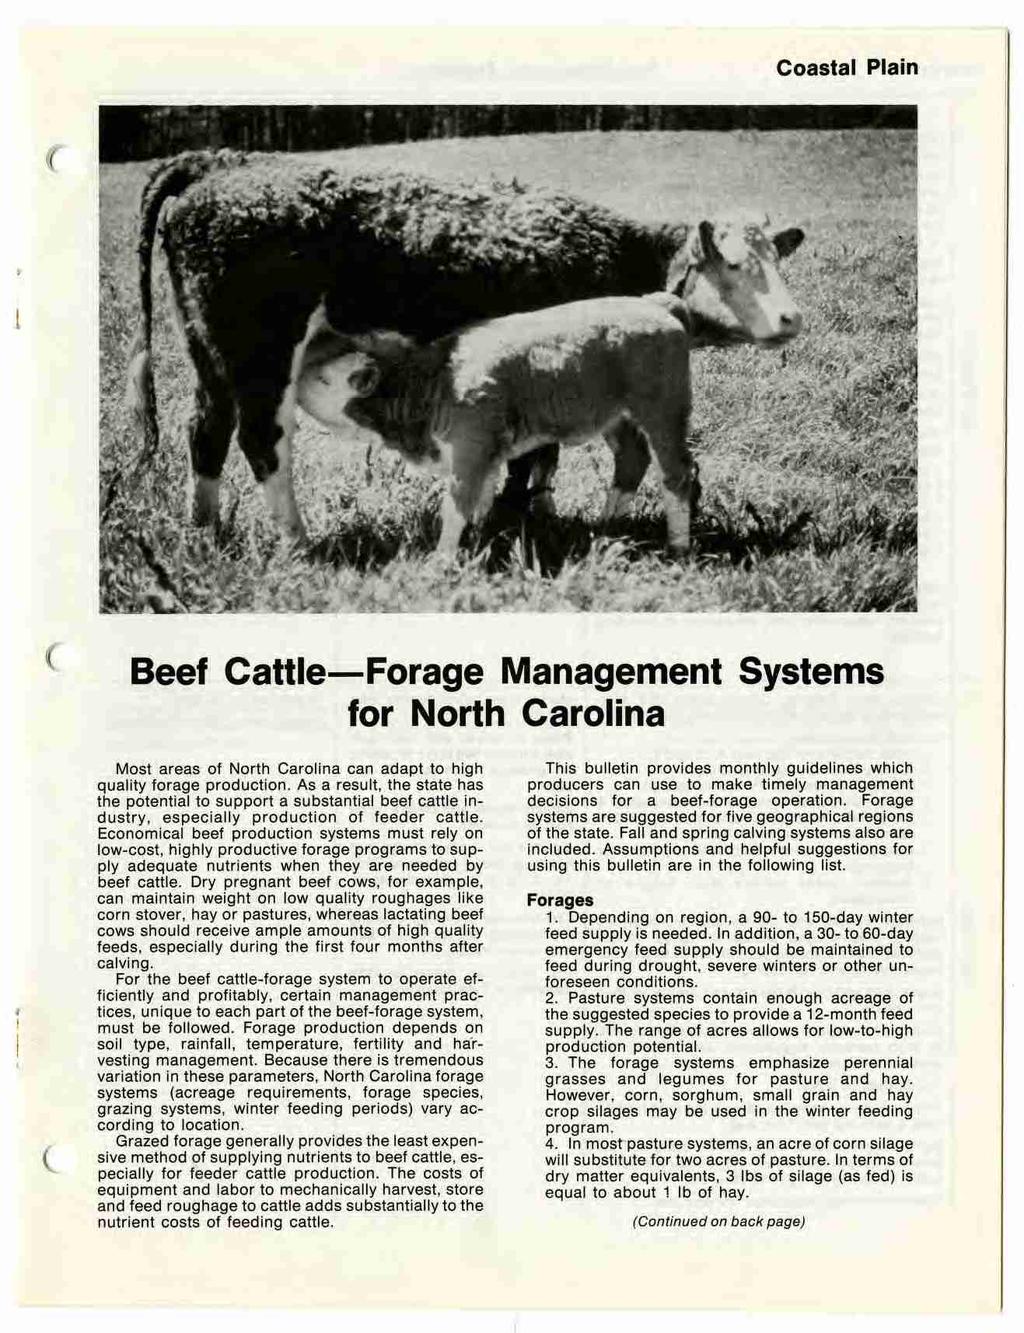 Coastal Plain Beef Cattle Forage Management Systems Most areas of North Carolina can adapt to high quality forage production.